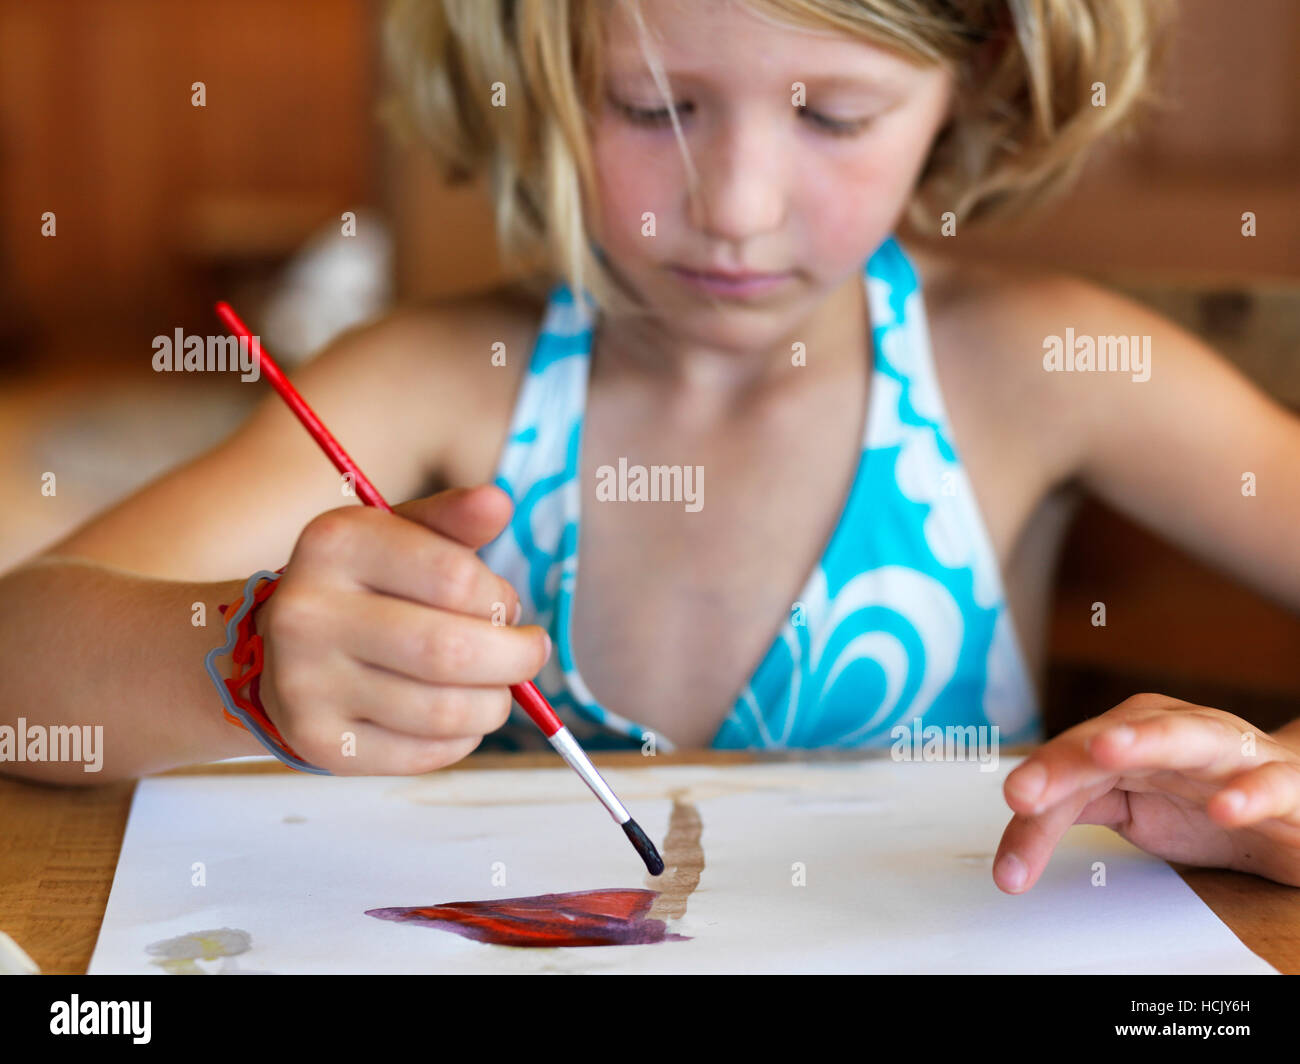 A young girl paints with watercolors. Stock Photo